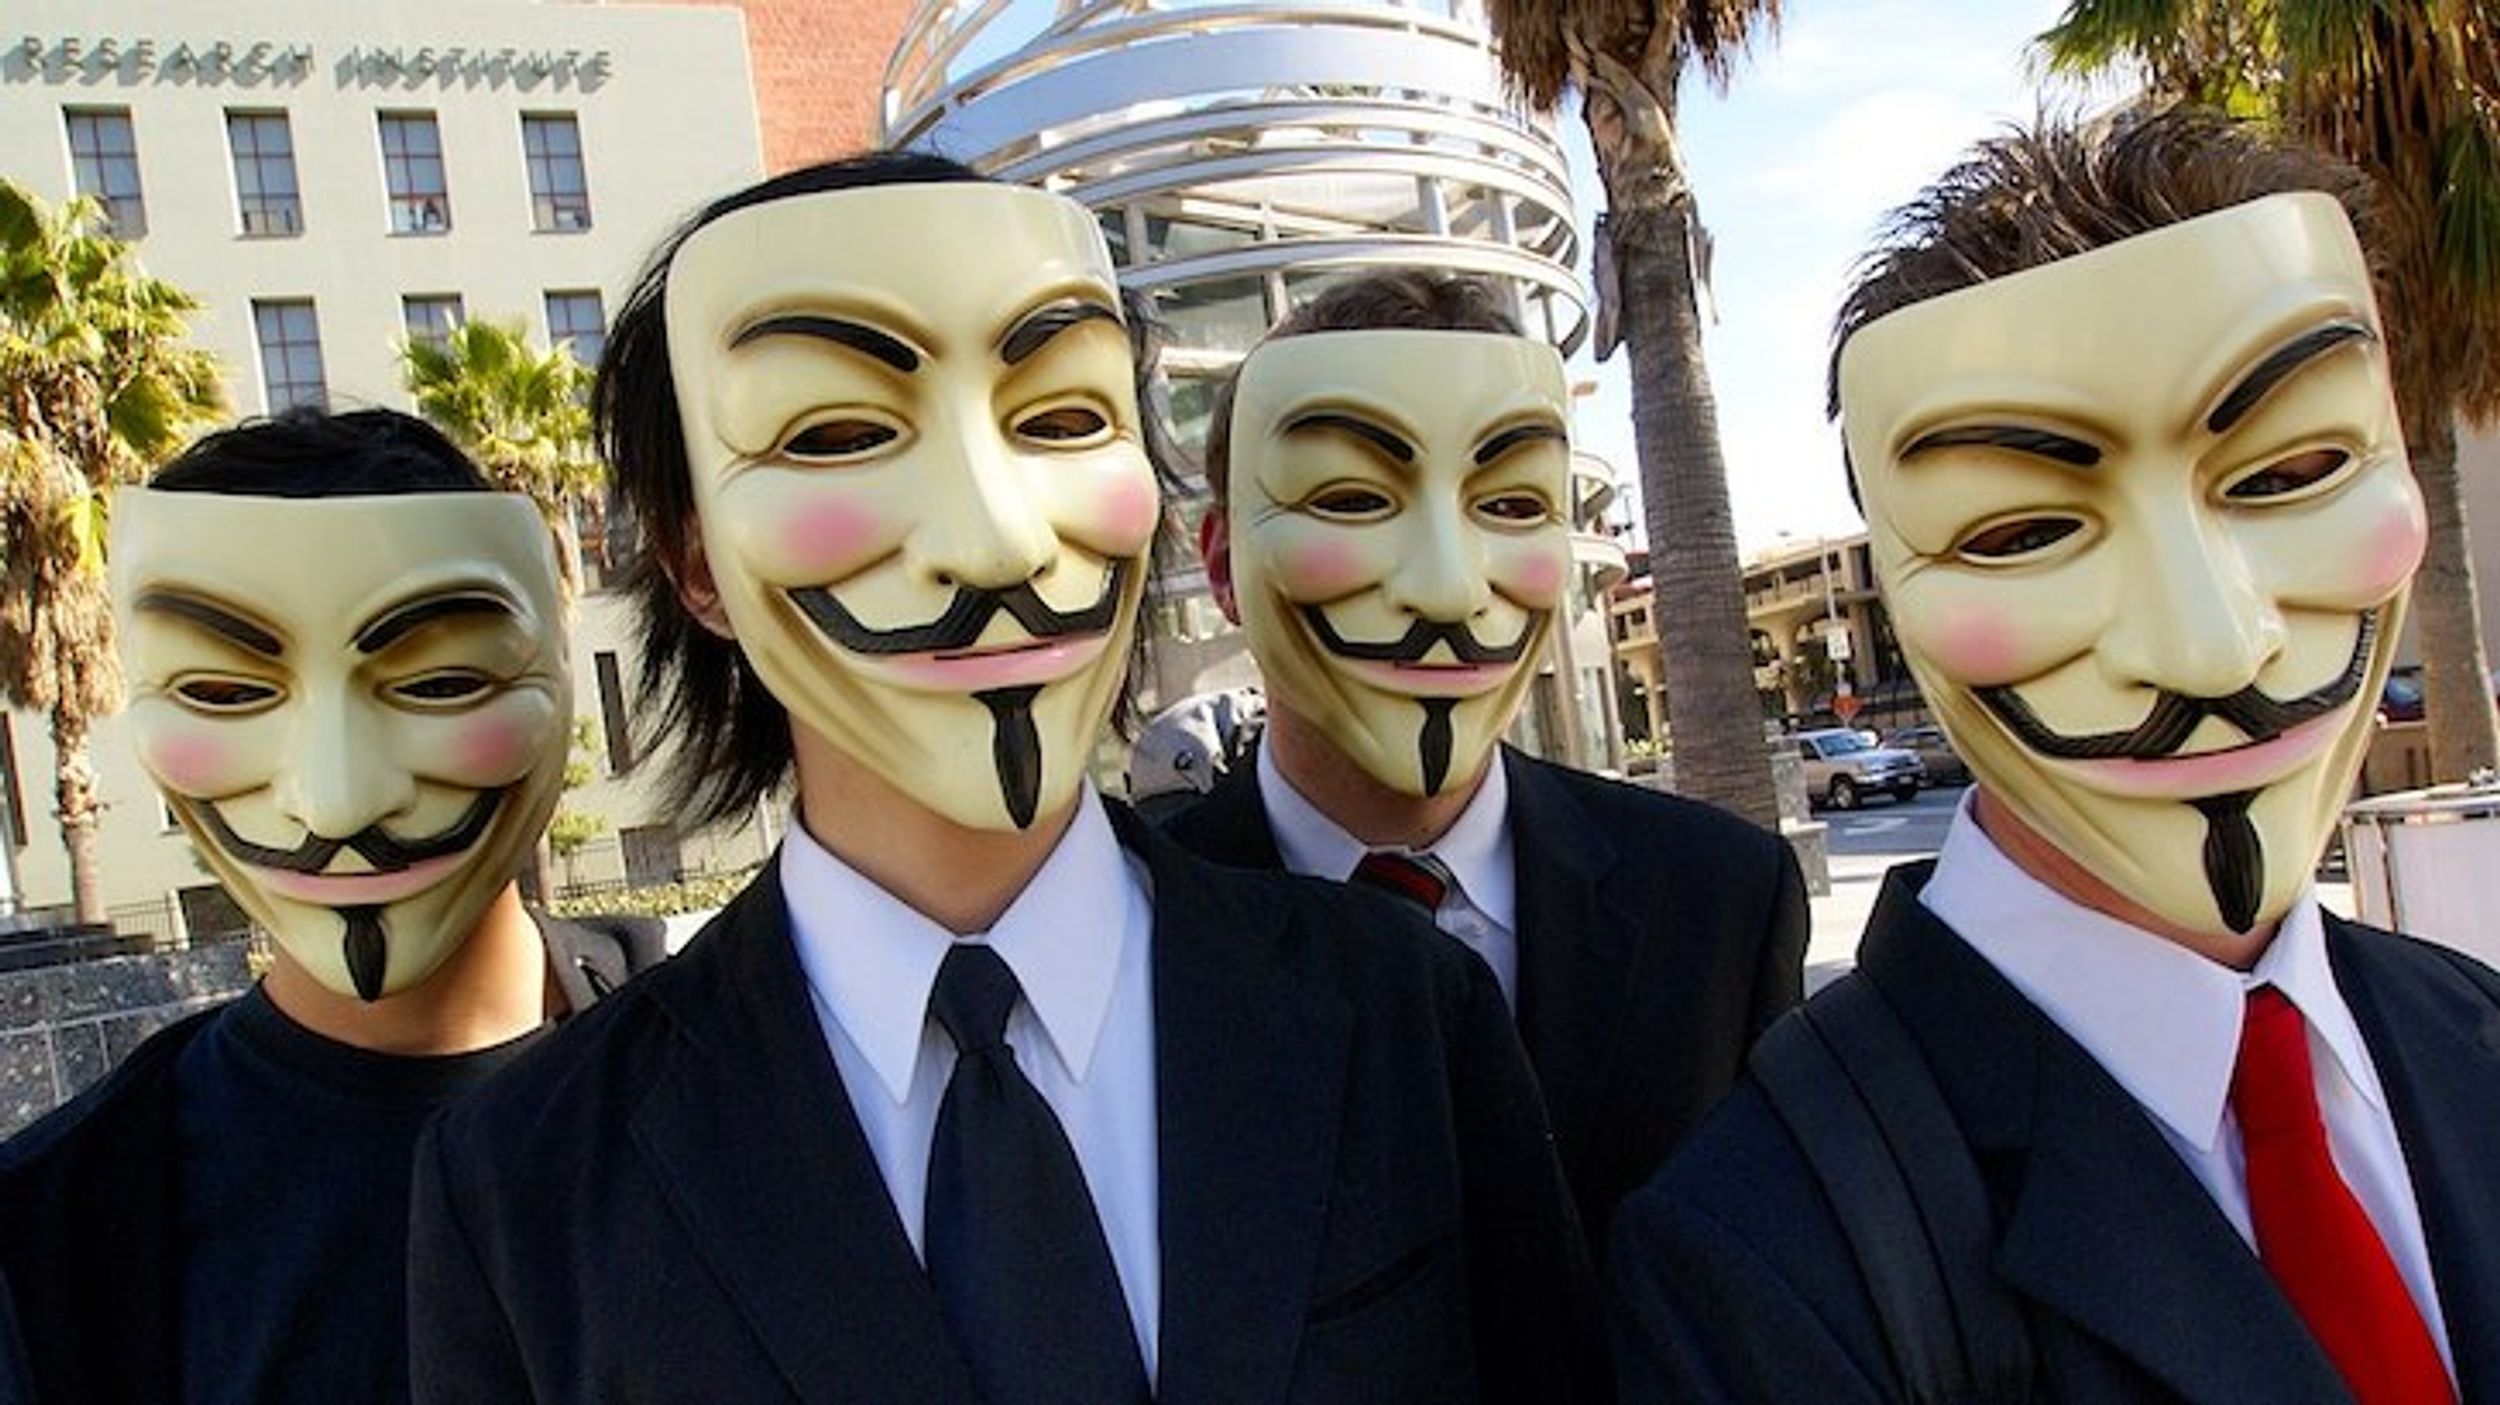 The Fifth of November: What Is a Guy Fawkes Mask?